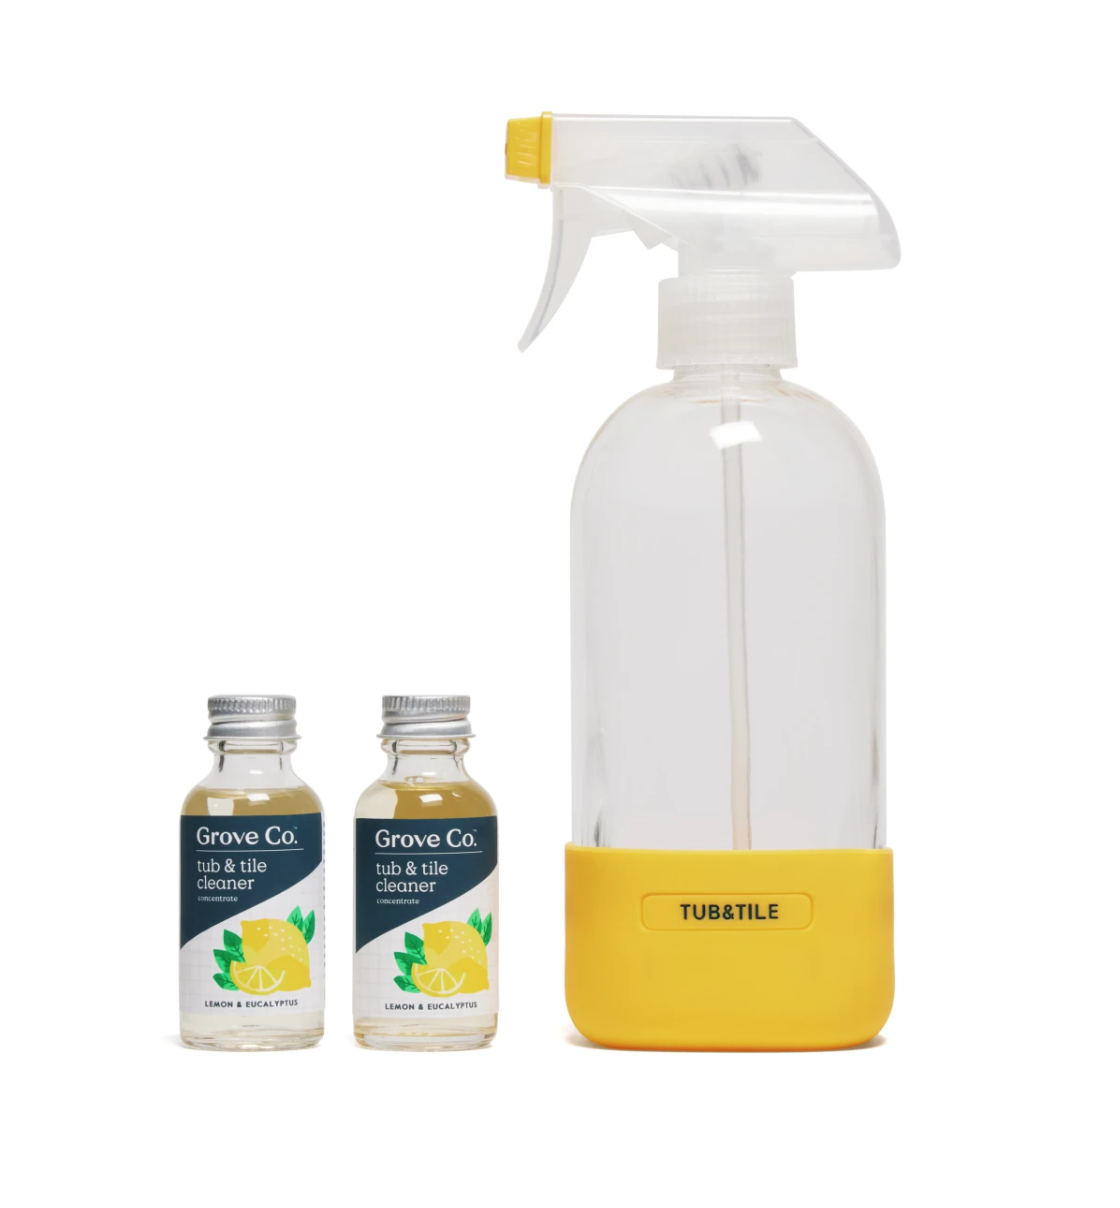 Grove Co. Tub & Tile Cleaner Concentrate + Reusable Cleaning Glass Spray Bottle